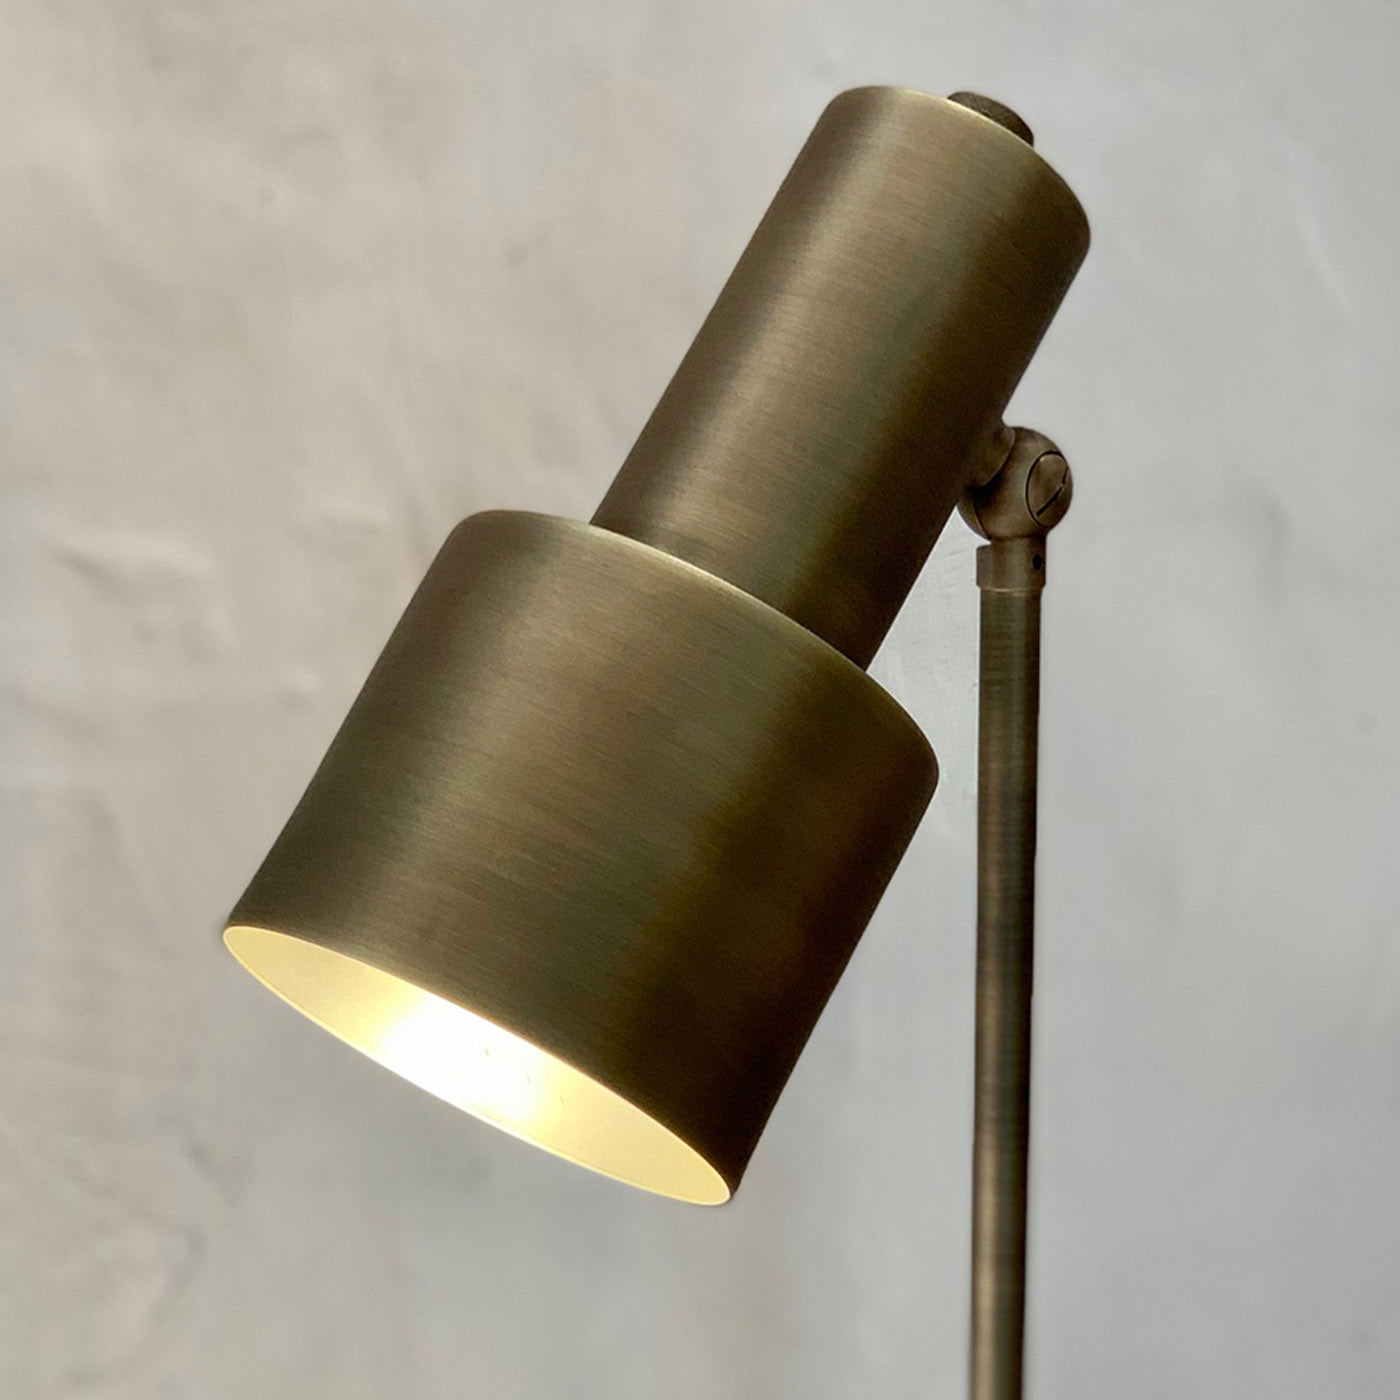 Light Gallery Luxury GP Bronzed Table Lamp by Marco Police - Alternative view 1